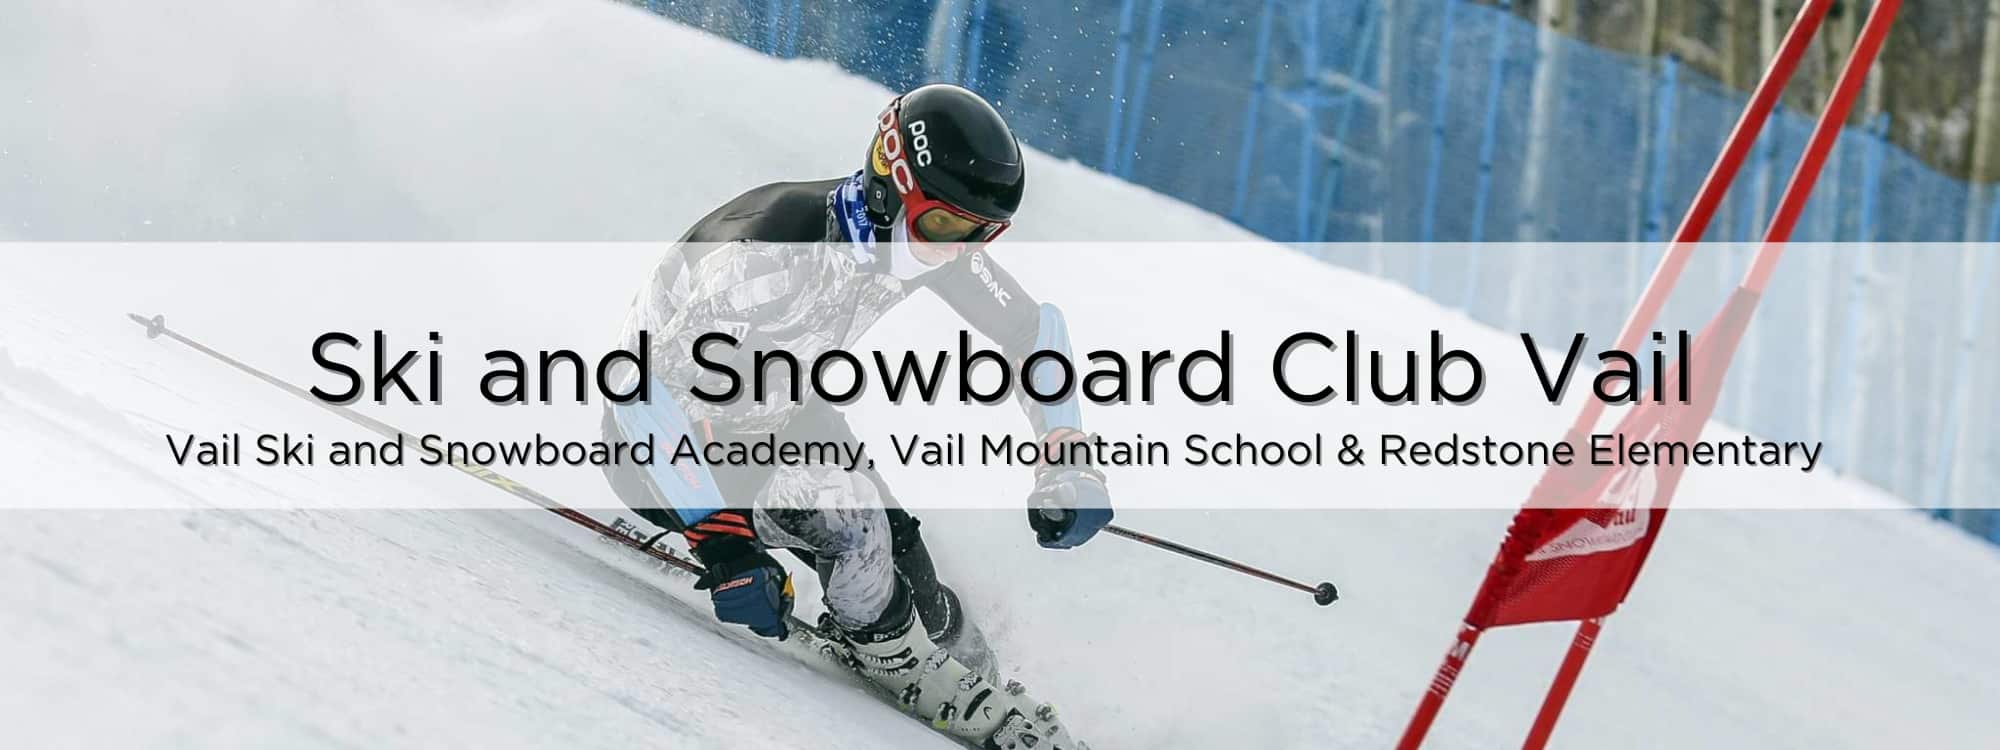 Vail Ski and Snowboard Academy with Ski and Snowboard Club Vail